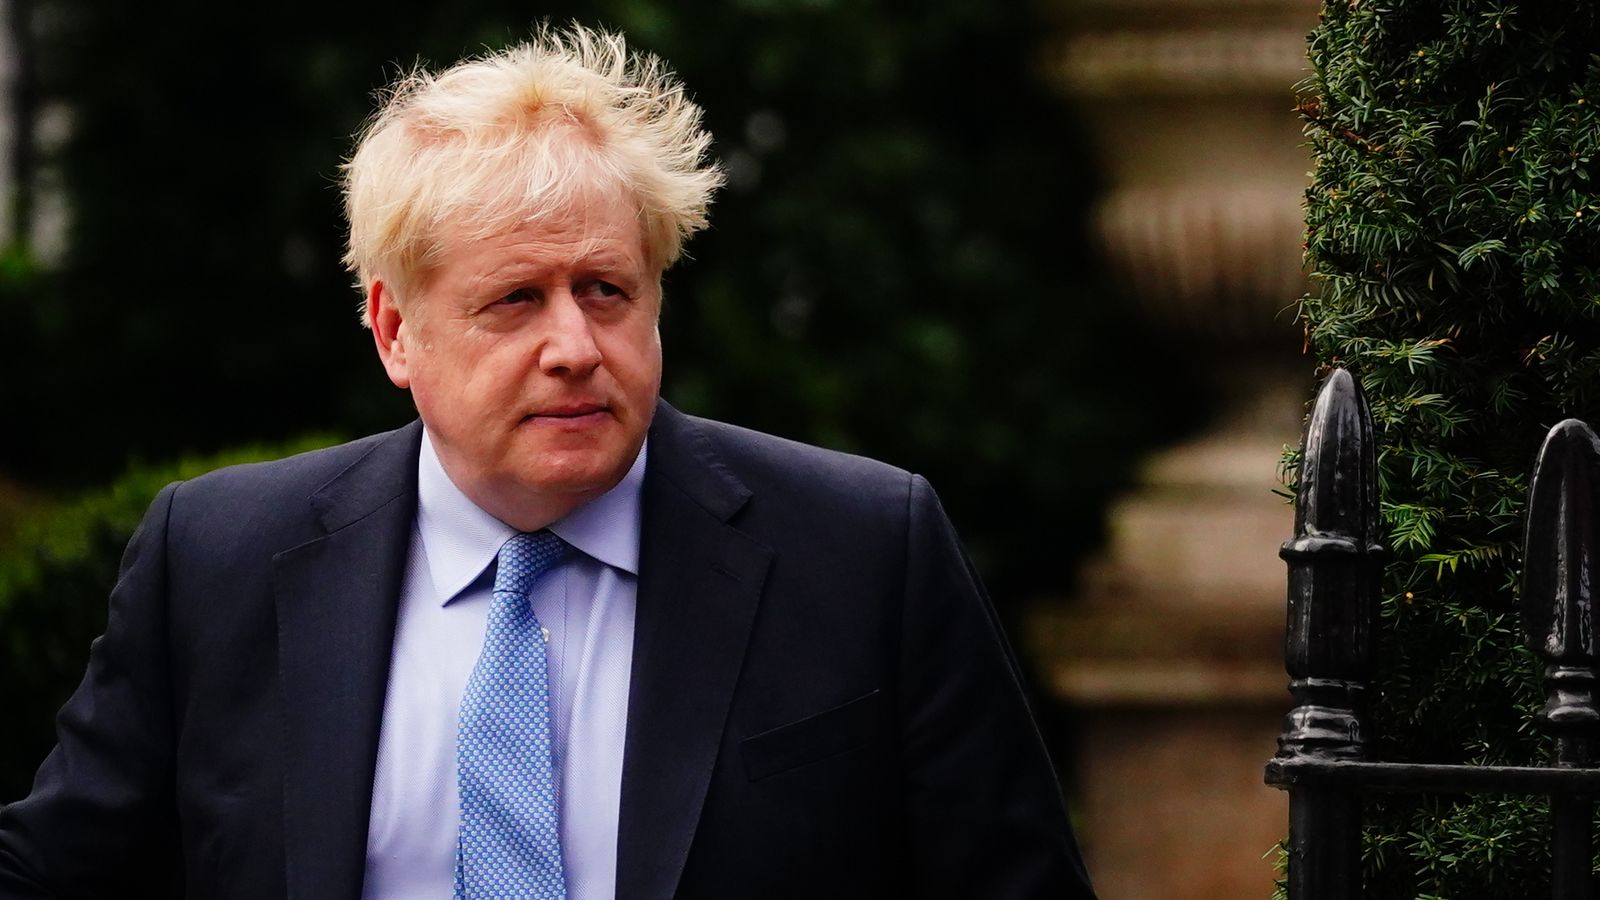 Damning verdict expected as panel of MPs conclude inquiry on whether Boris Johnson misled Commons